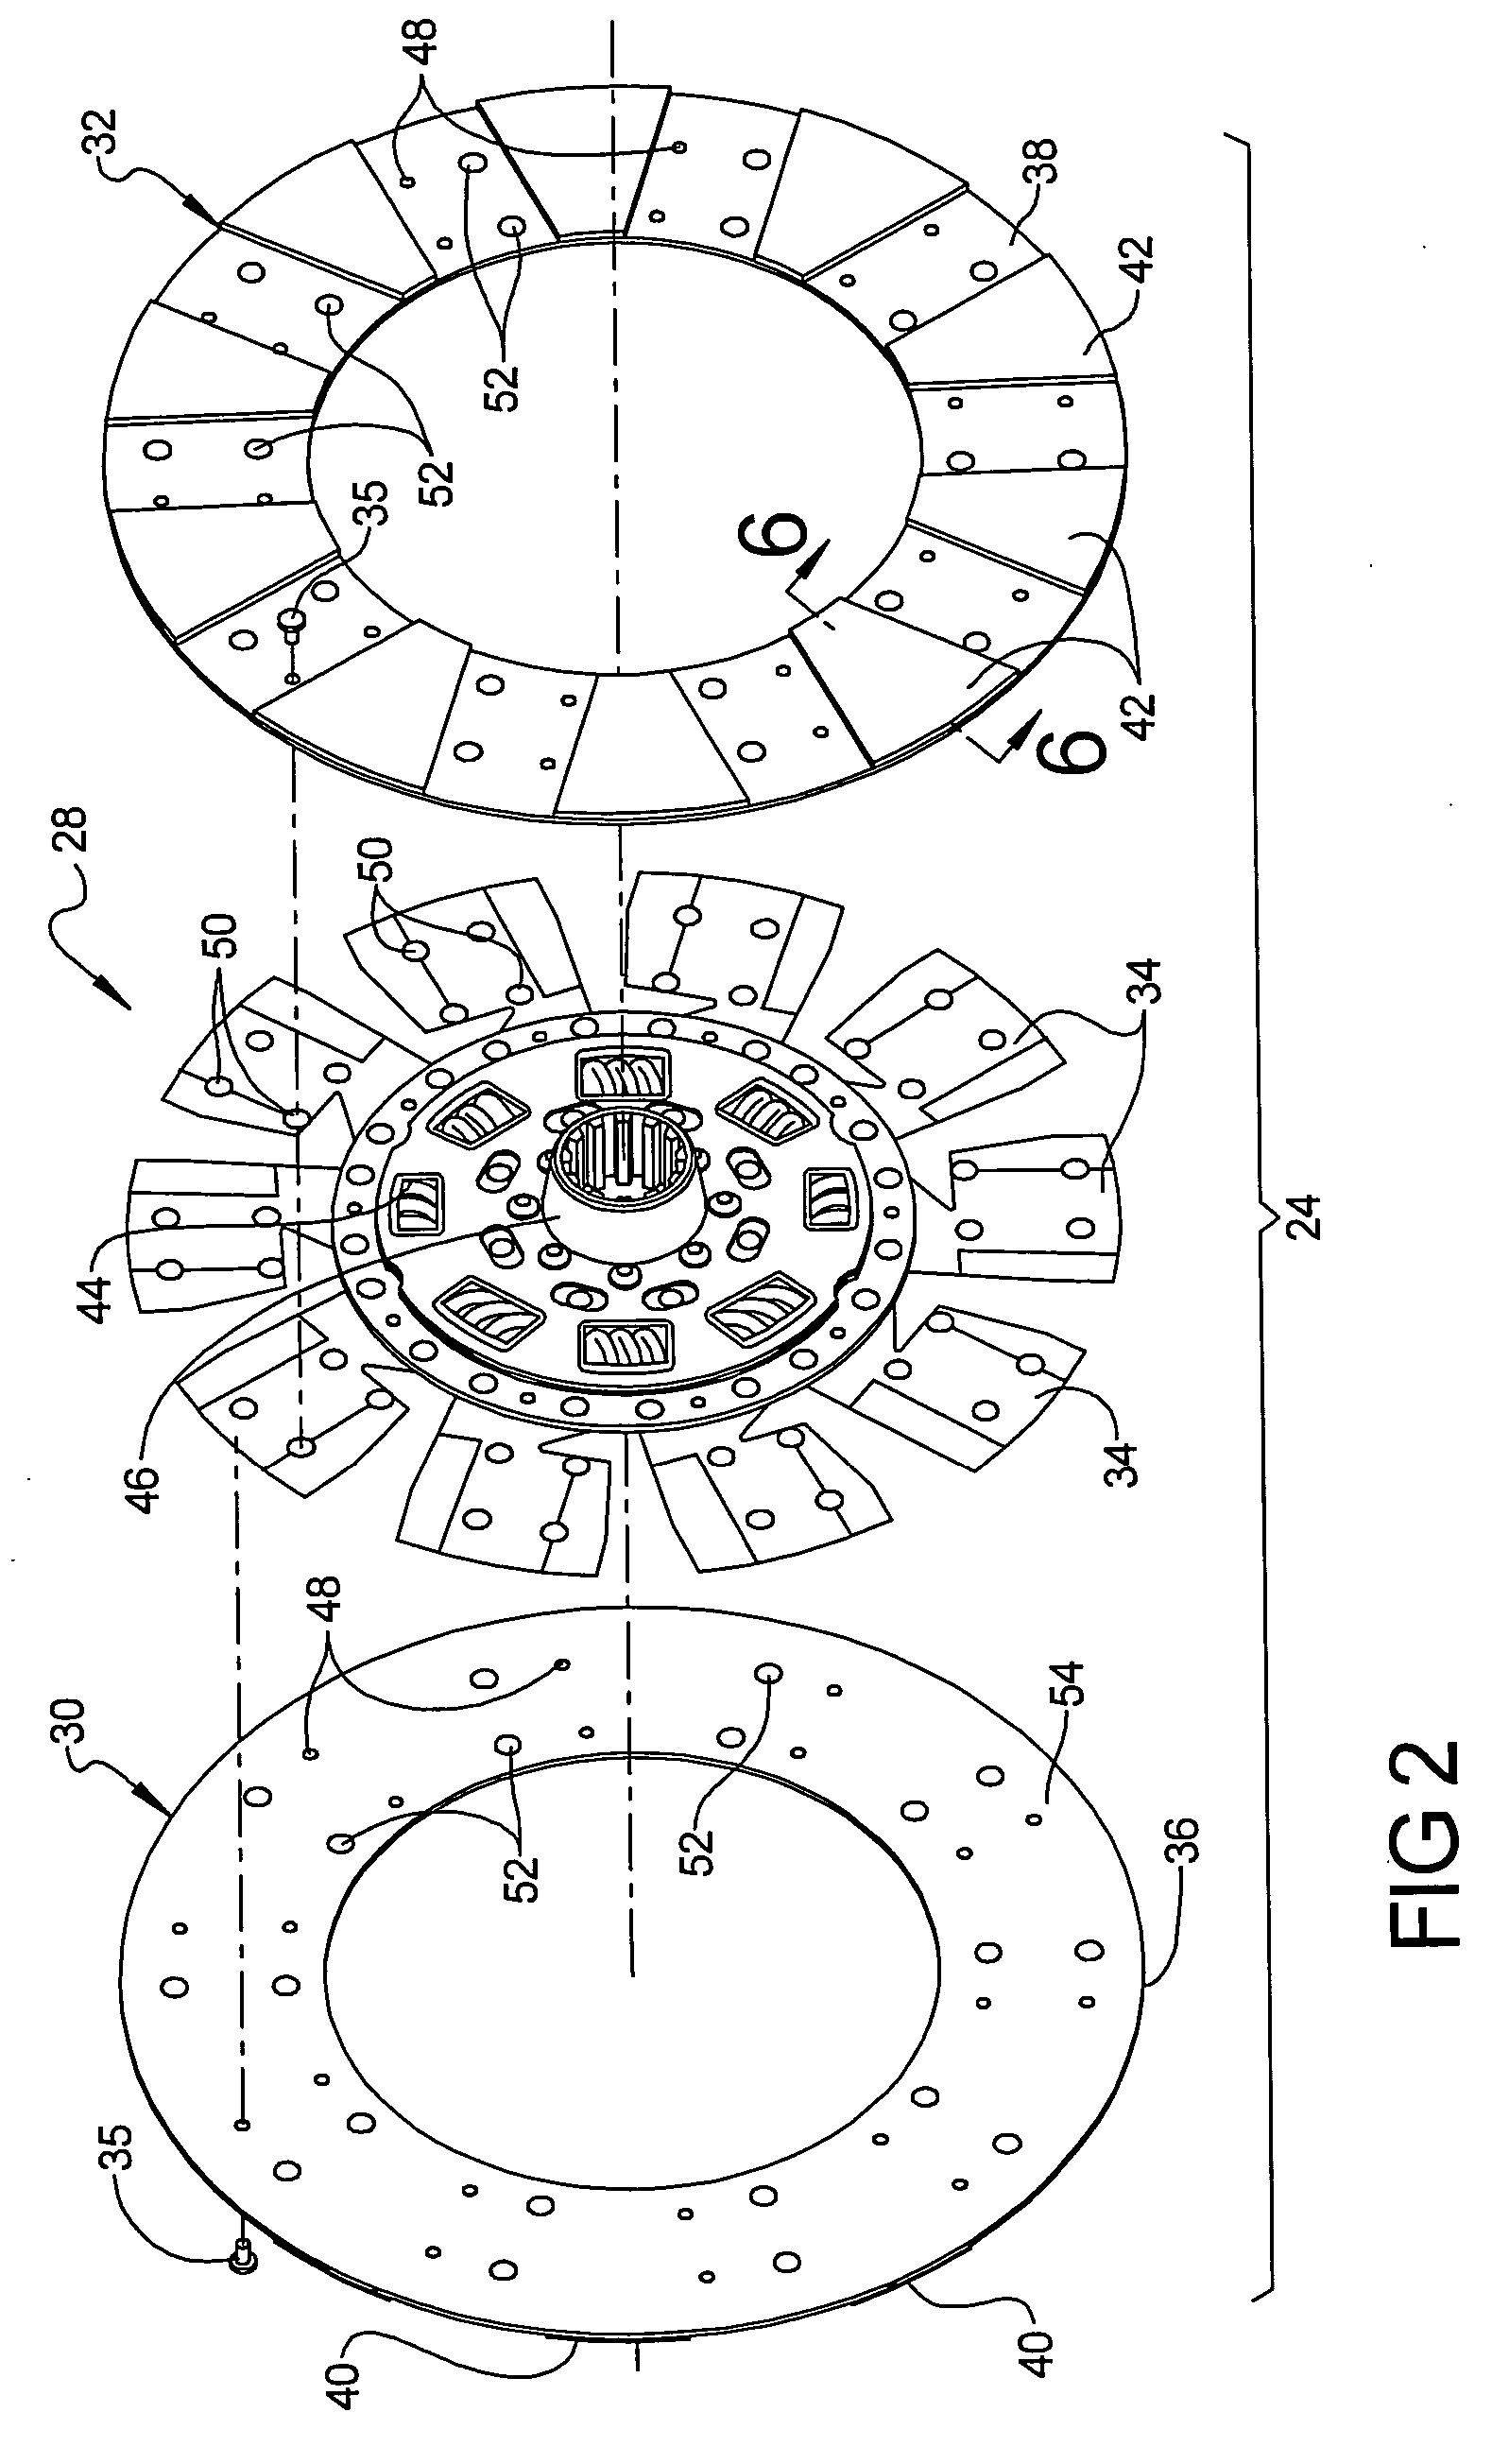 Clutch disc assembly with direct bond ceramic friction material